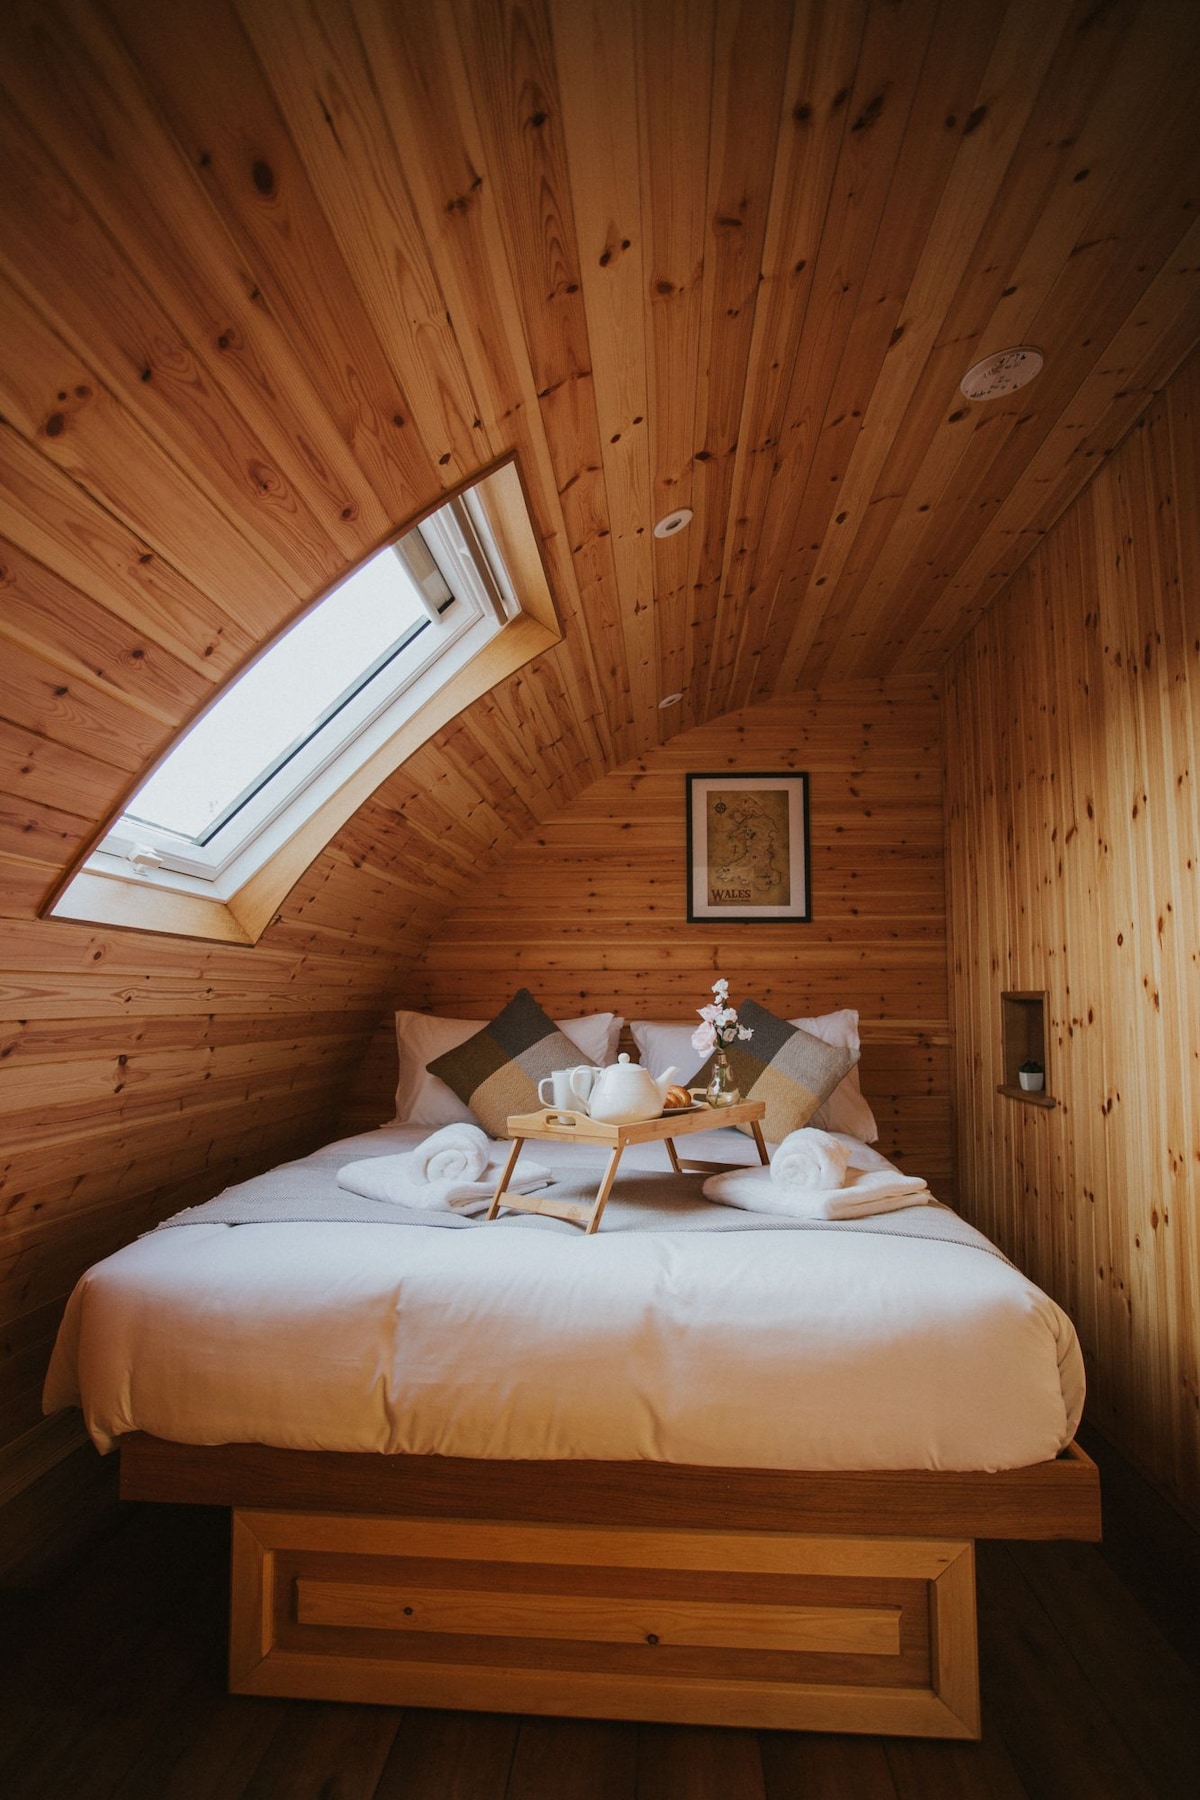 Primrose 2 bedroom glamping pod with hot tub.